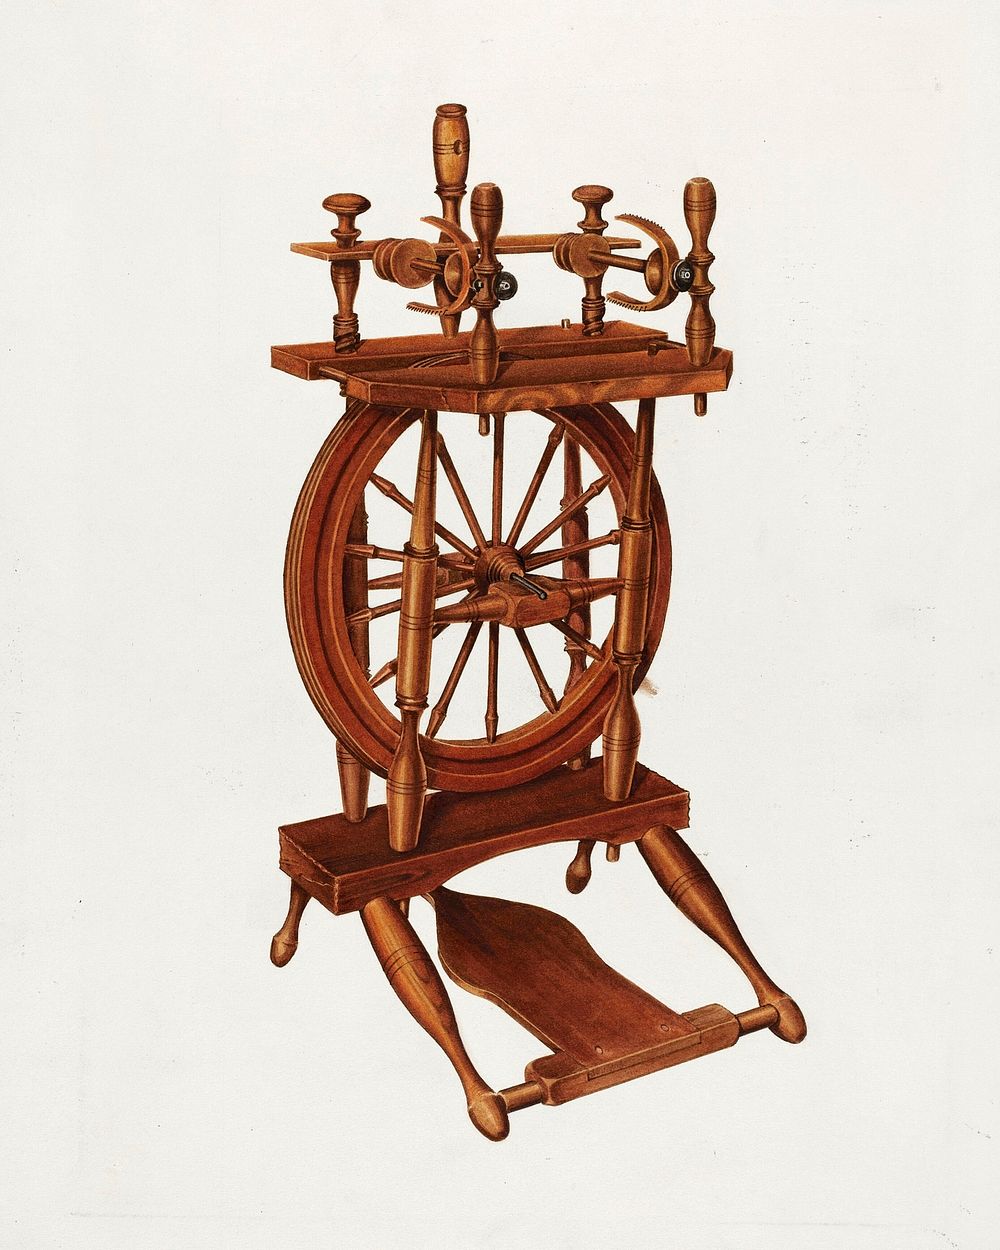 Wood Spinning Wheel (ca.1938) by Arthur Mathews. Original from The National Gallery of Art. Digitally enhanced by rawpixel.